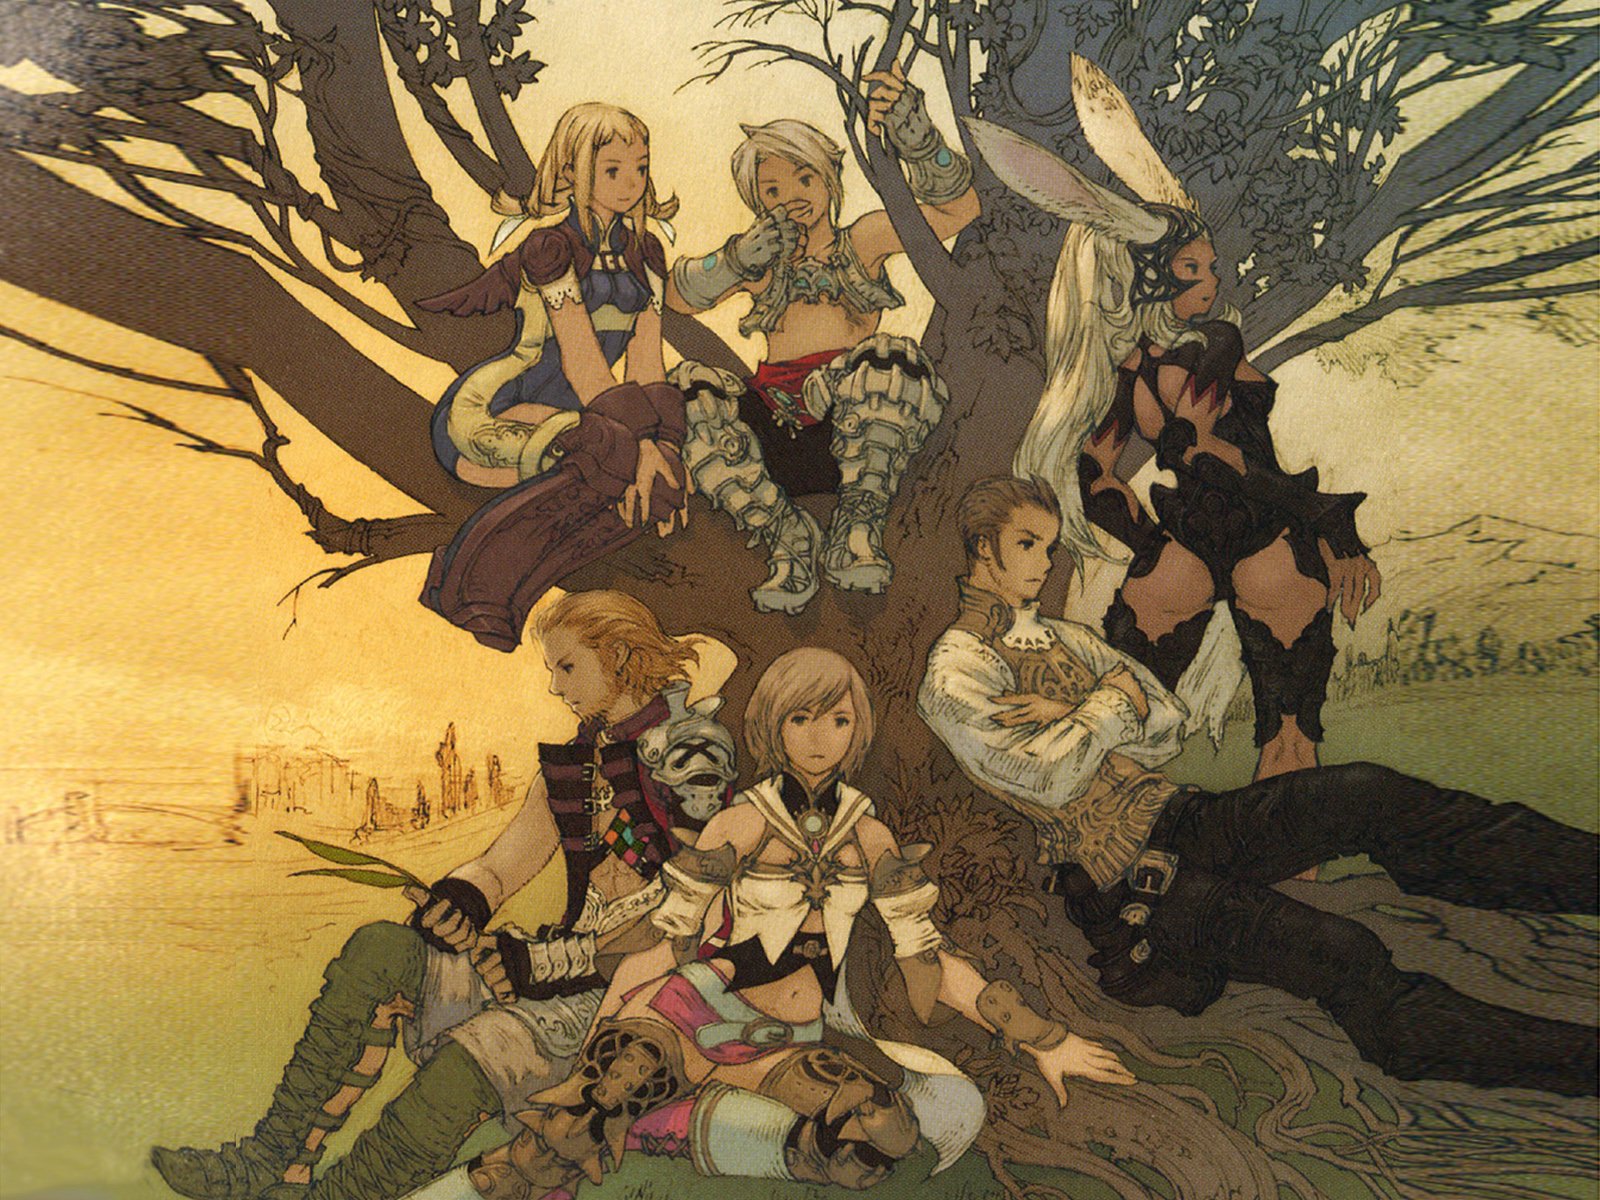 Final Fantasy Xii HD Wallpaper Background Image